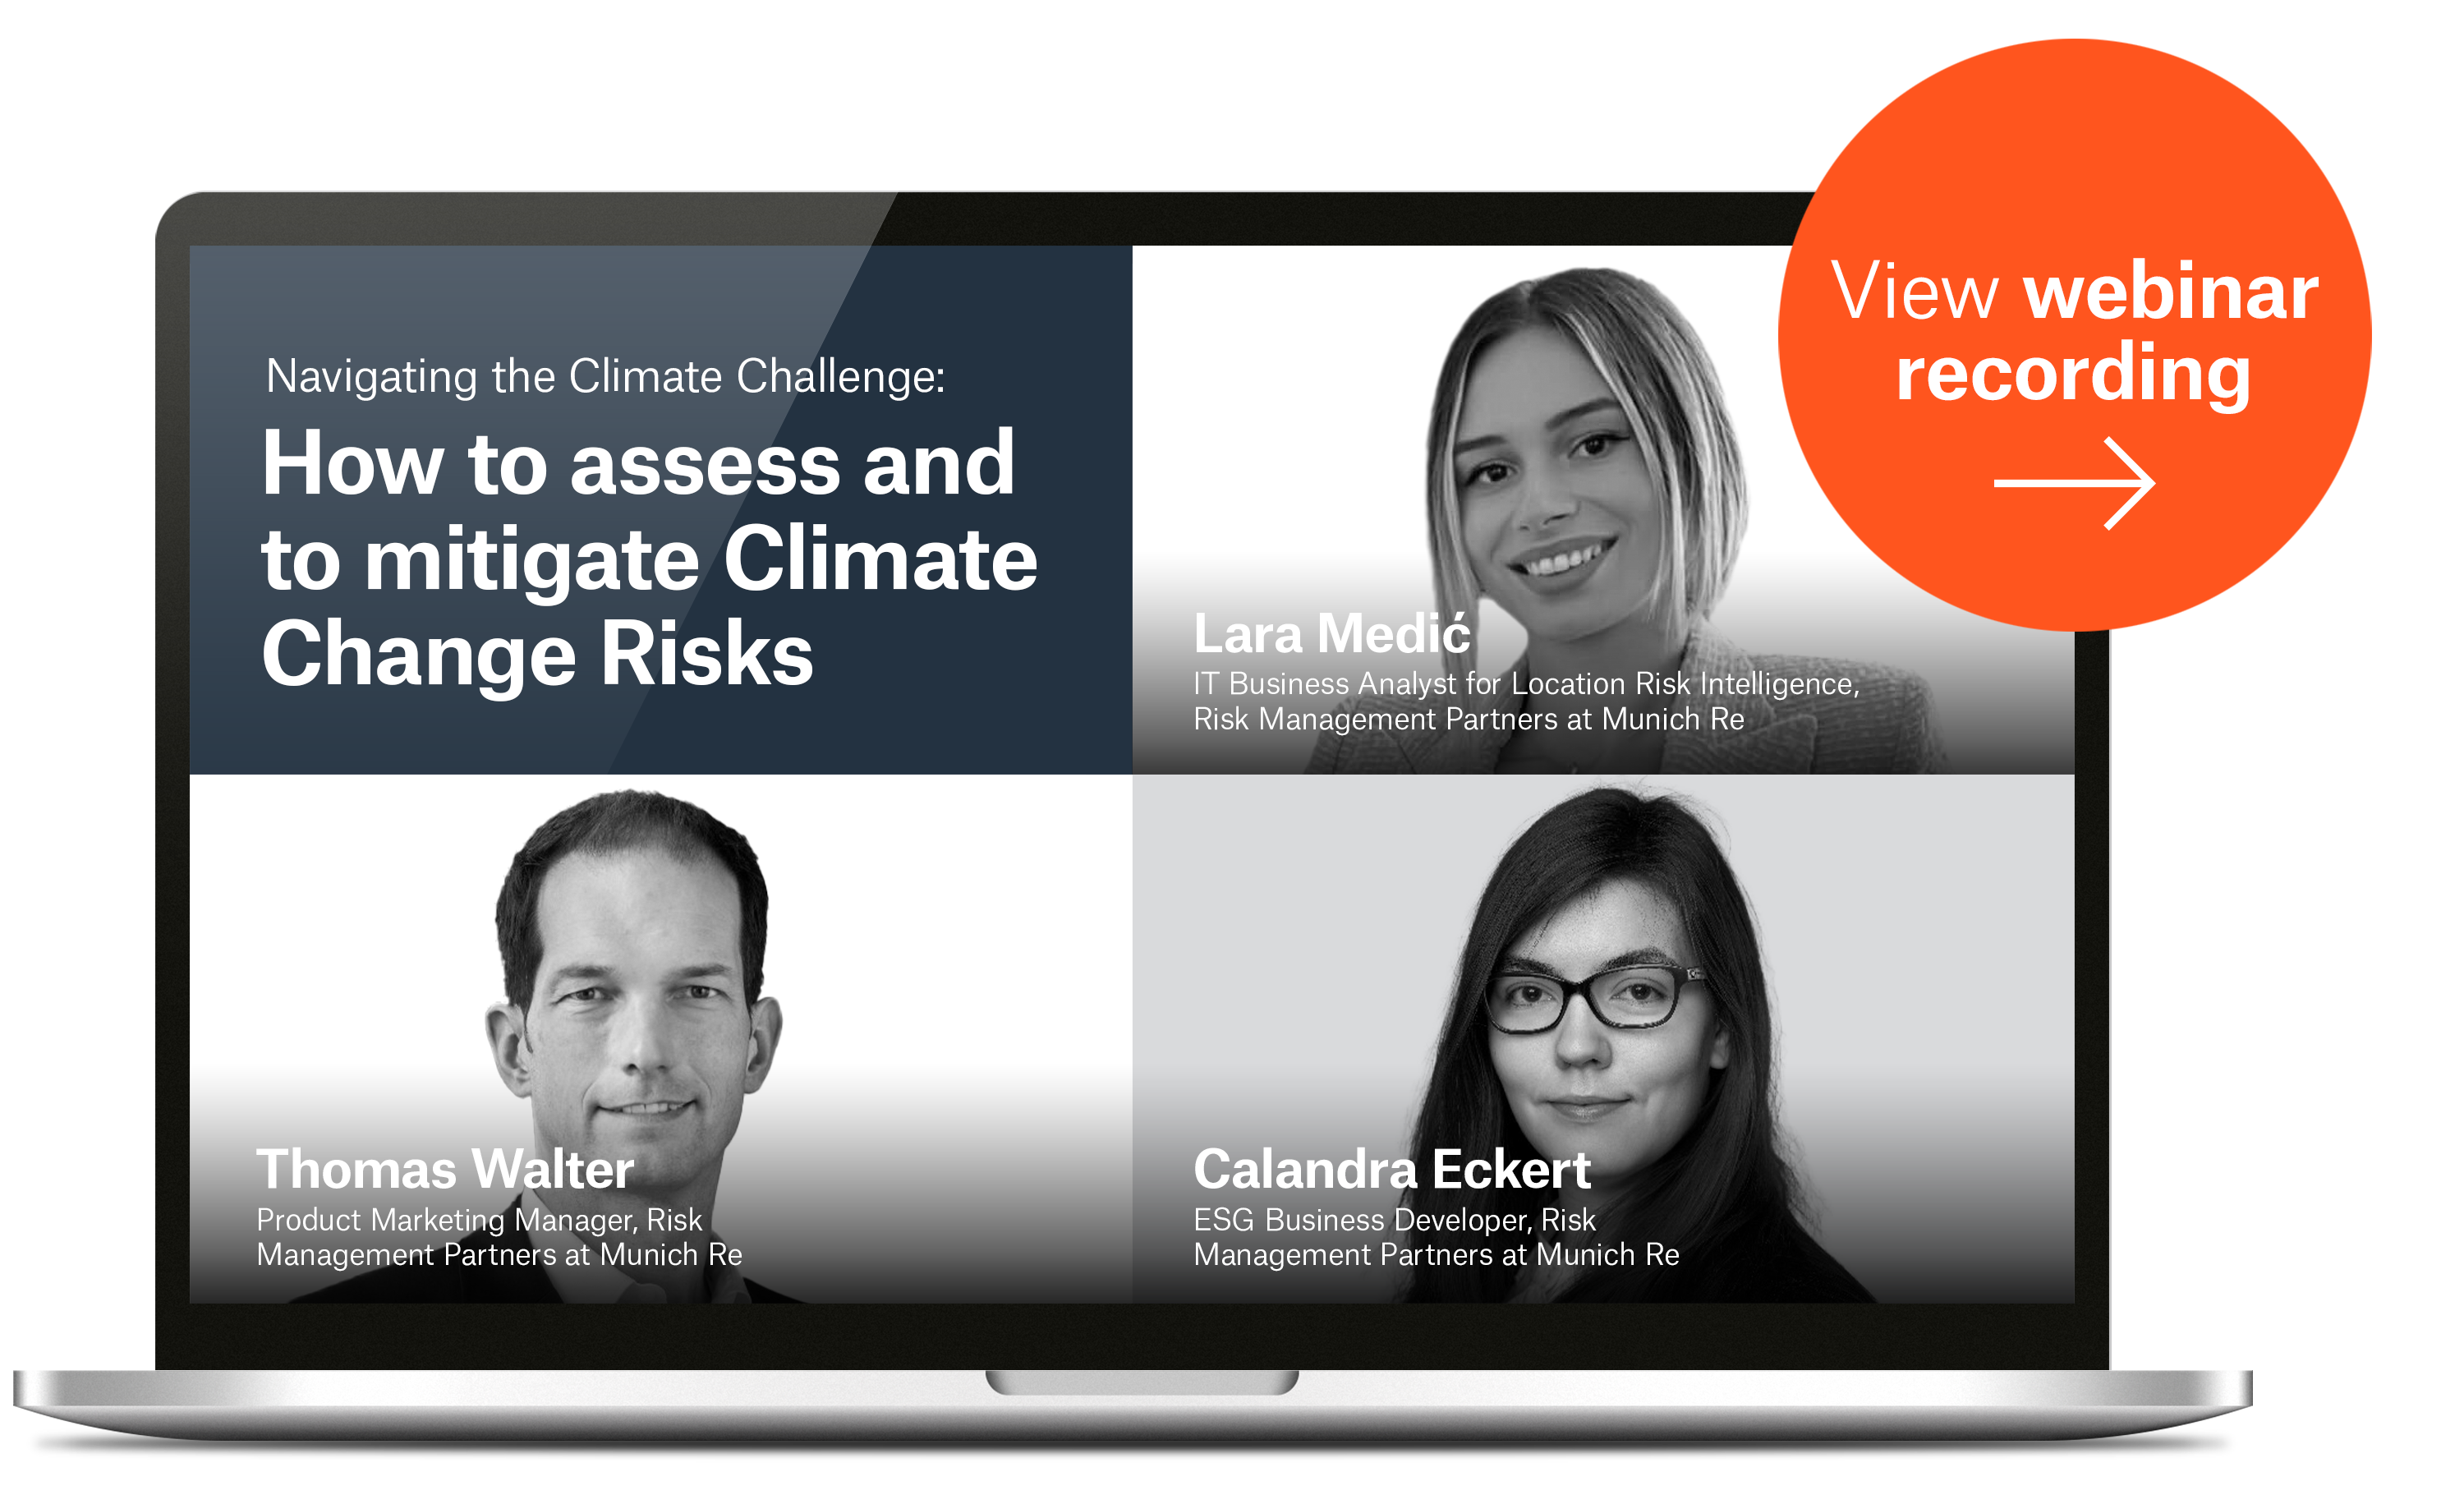 Webinar: Navigating the Climate Challenge: How to assess and to mitigate Climate Change Risks